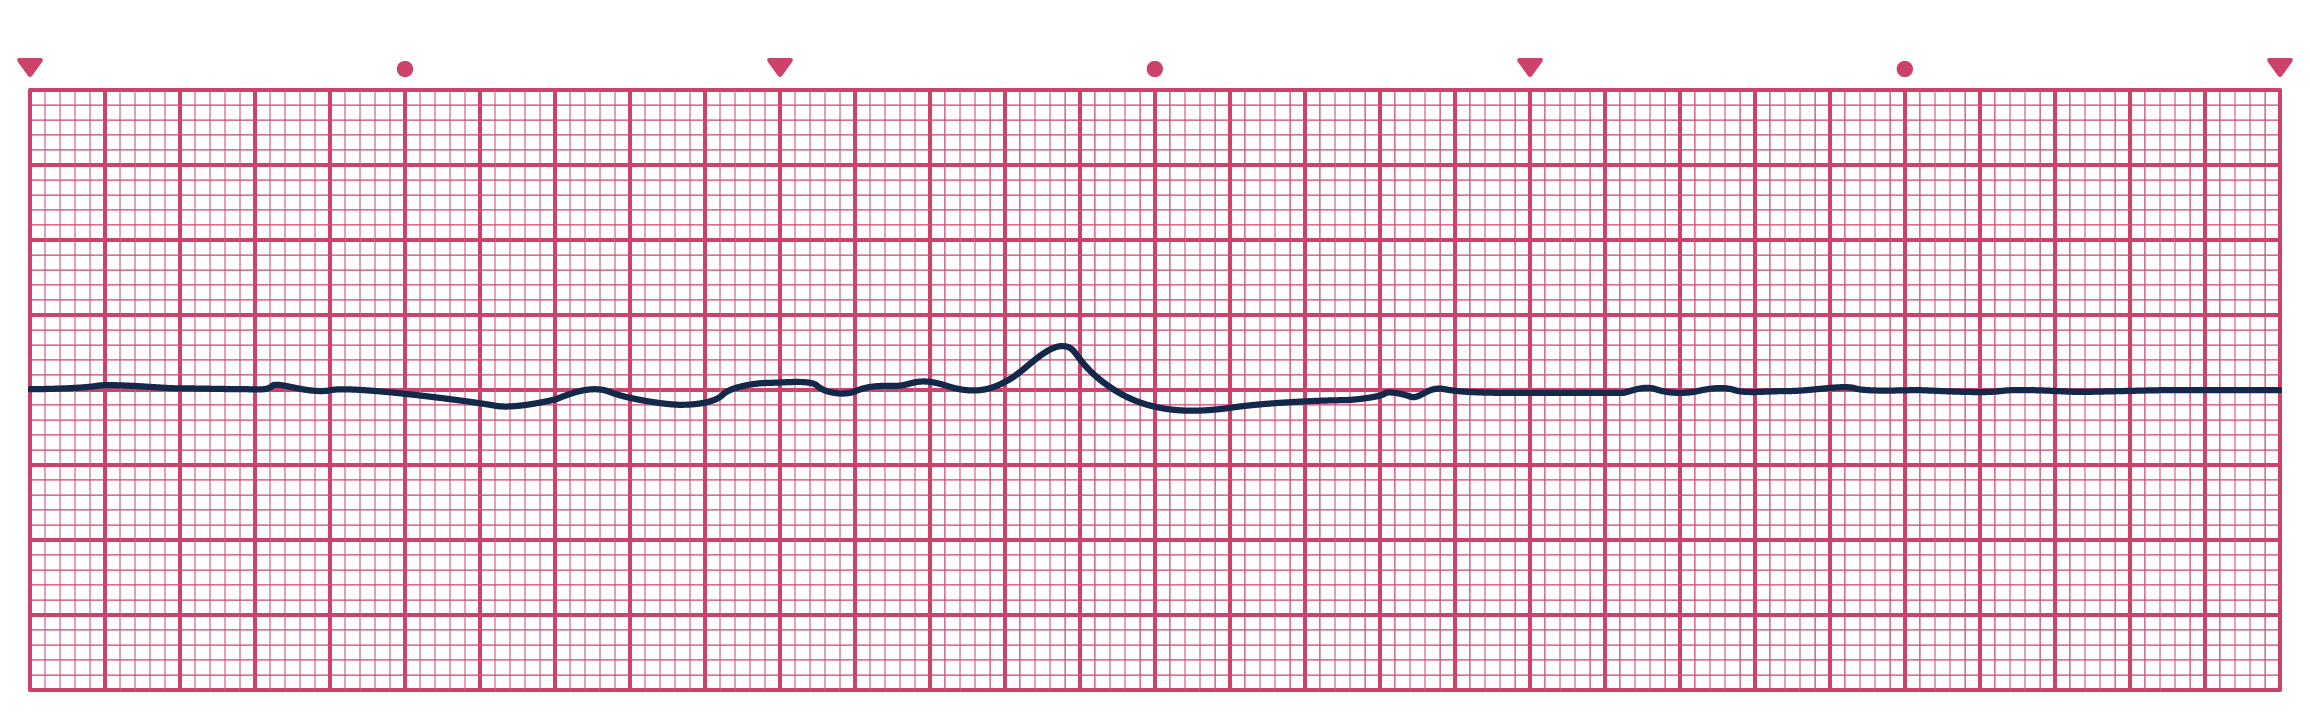 An ECG depicting Asystole